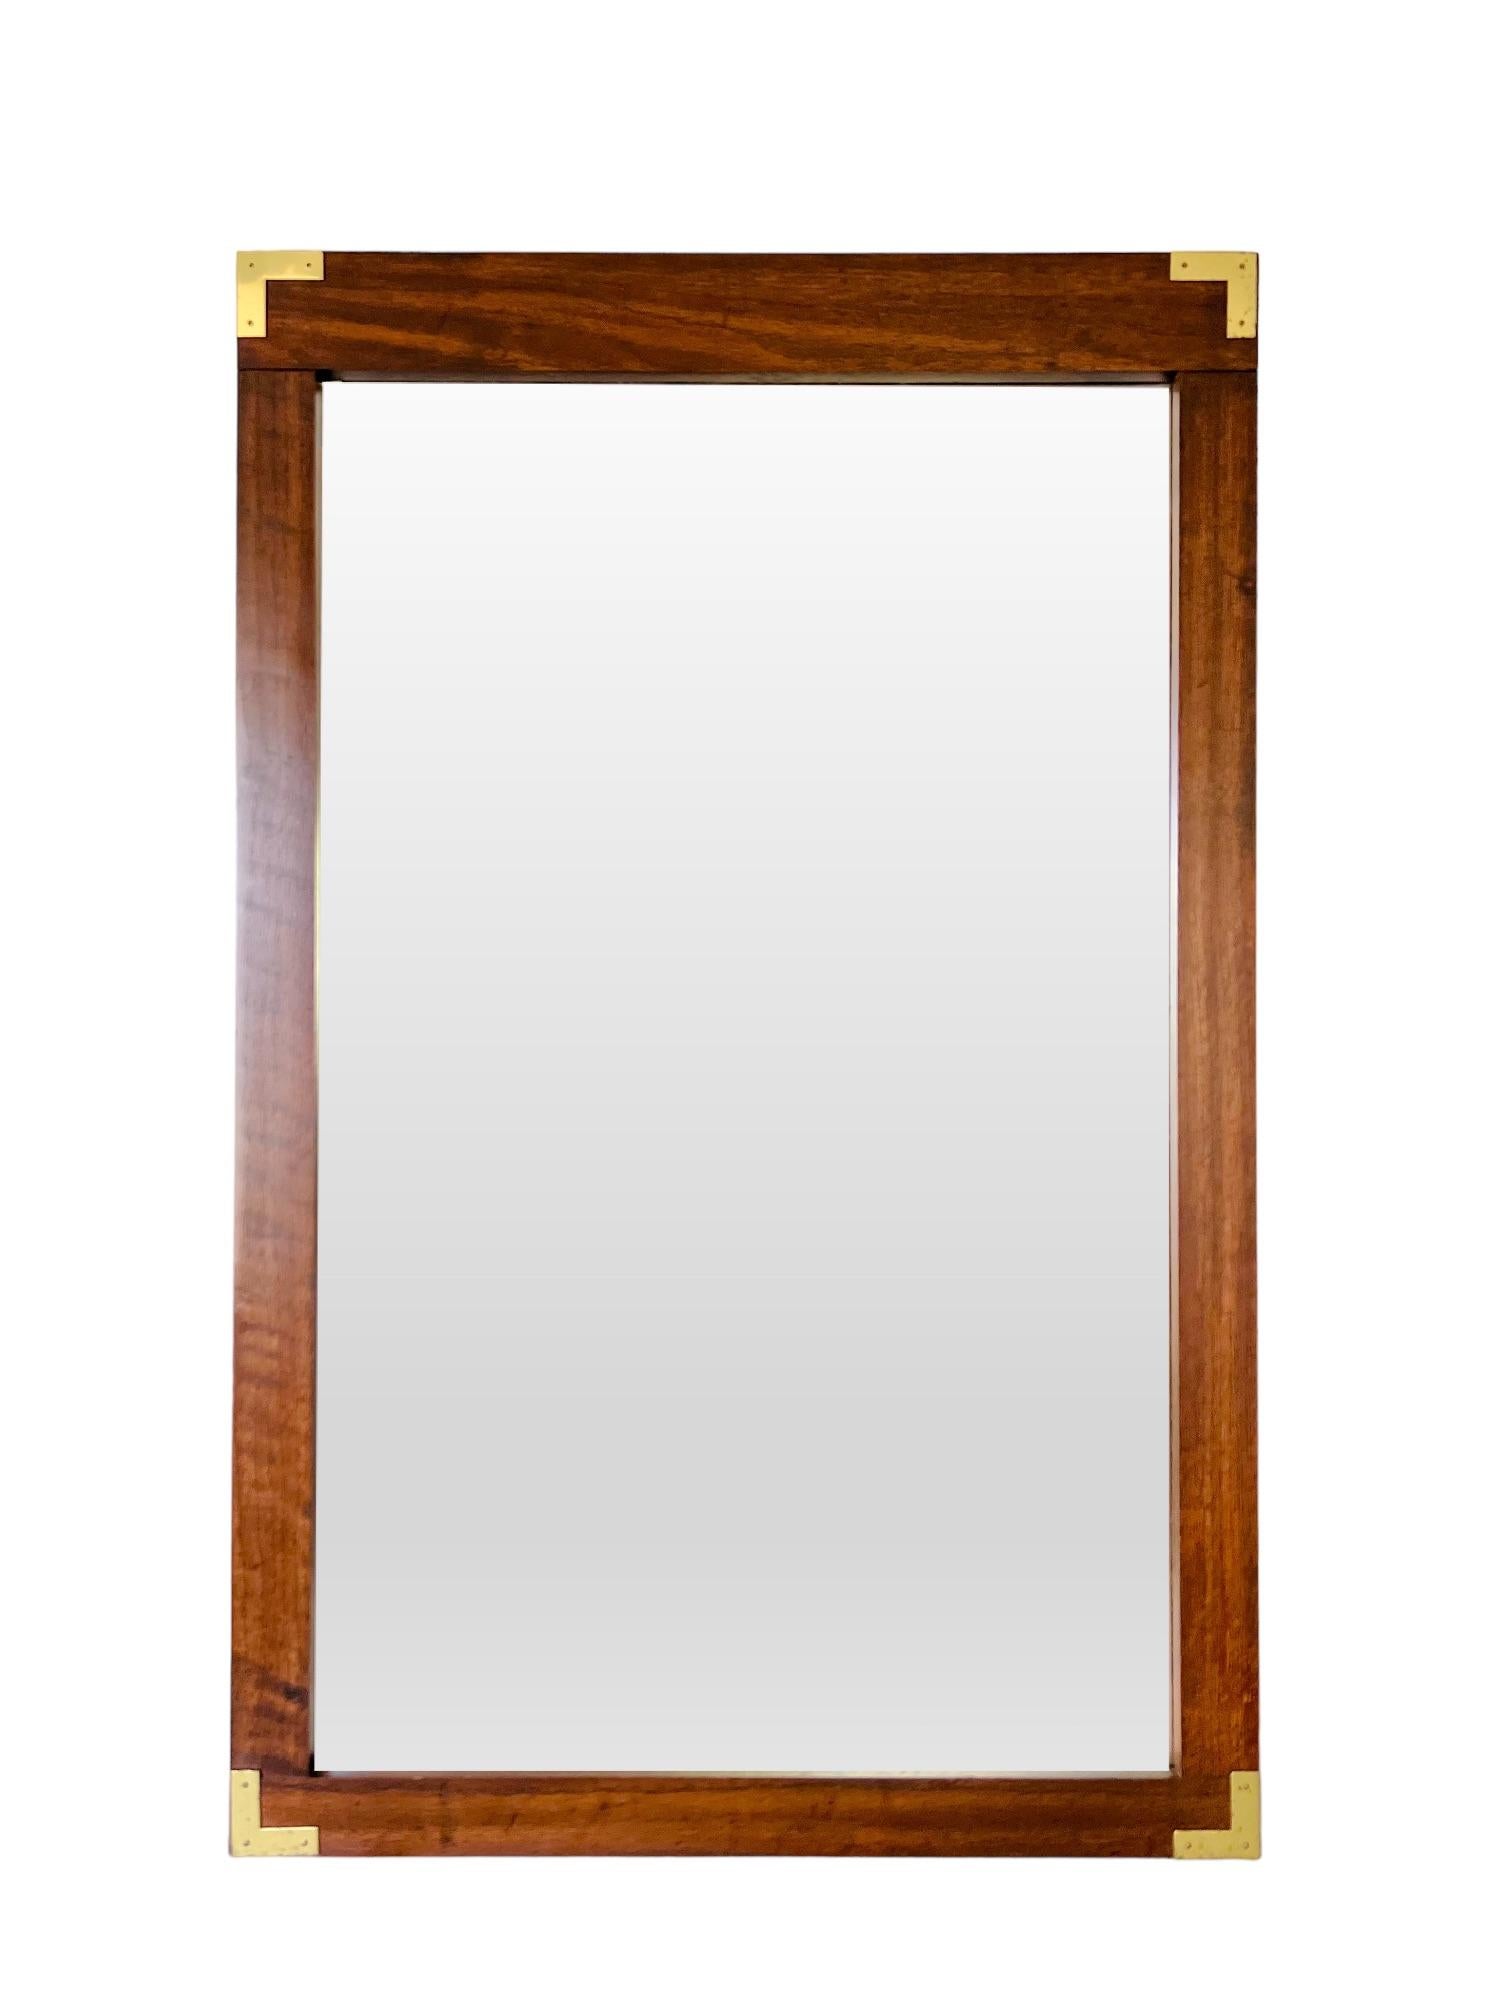 A vintage Mid-Century Modern Campaign style wall mirror. Wood frame with walnut veneer and brass plated metal corners.

Mounting wire/hardware not included - can be strung for vertical hanging (horizontal top piece is slightly taller than